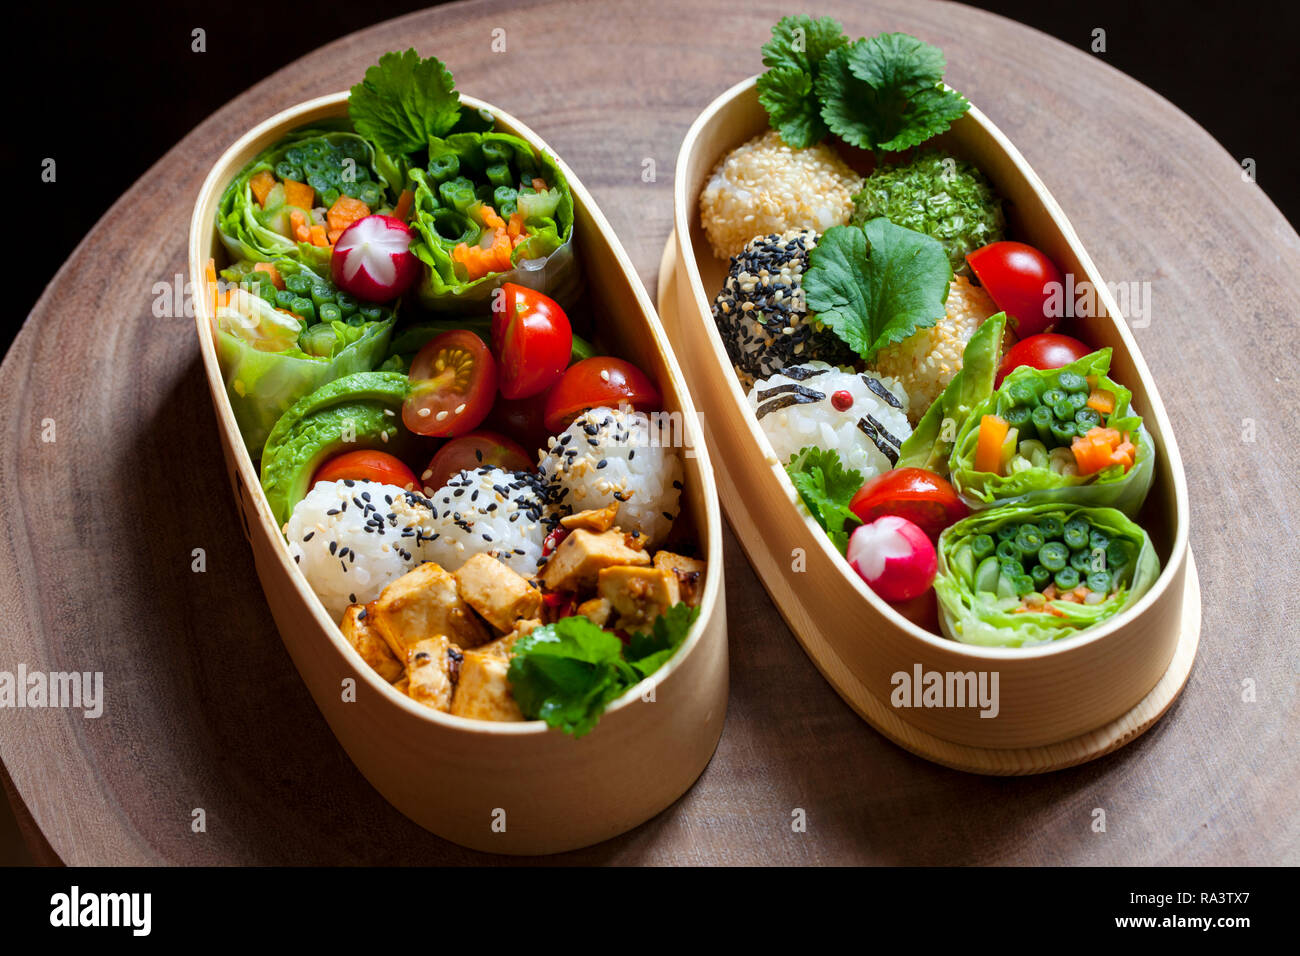 29 Healthy Vegan Bento Box Ideas and Recipes for Lunch